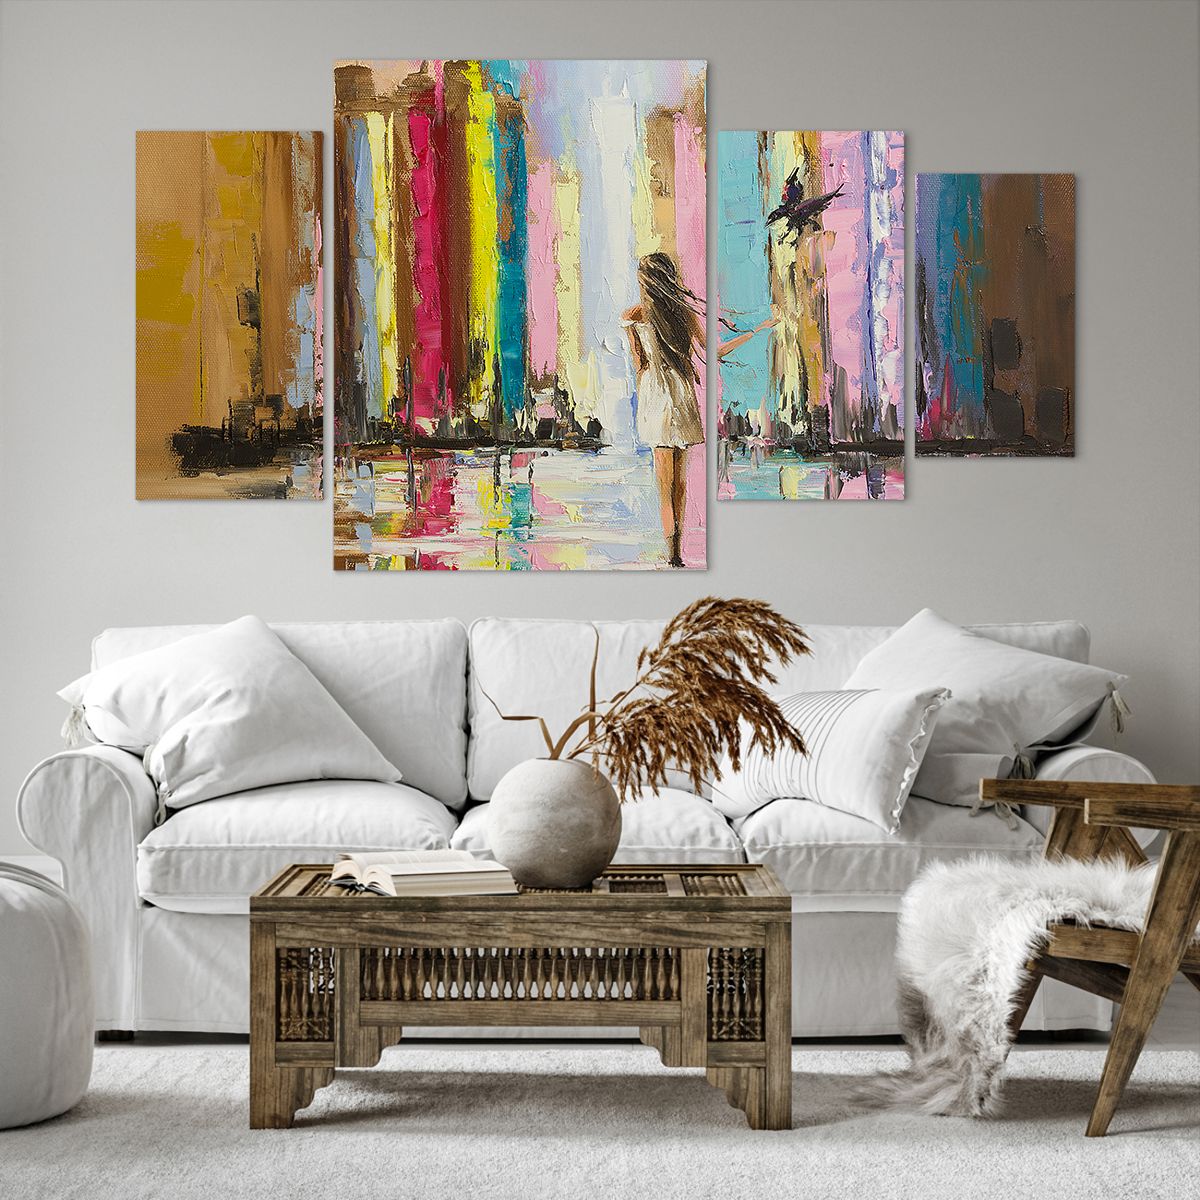 Impression sur toile Abstraction, Impression sur toile Fille, Impression sur toile Femme, Impression sur toile Architecture, Impression sur toile Art